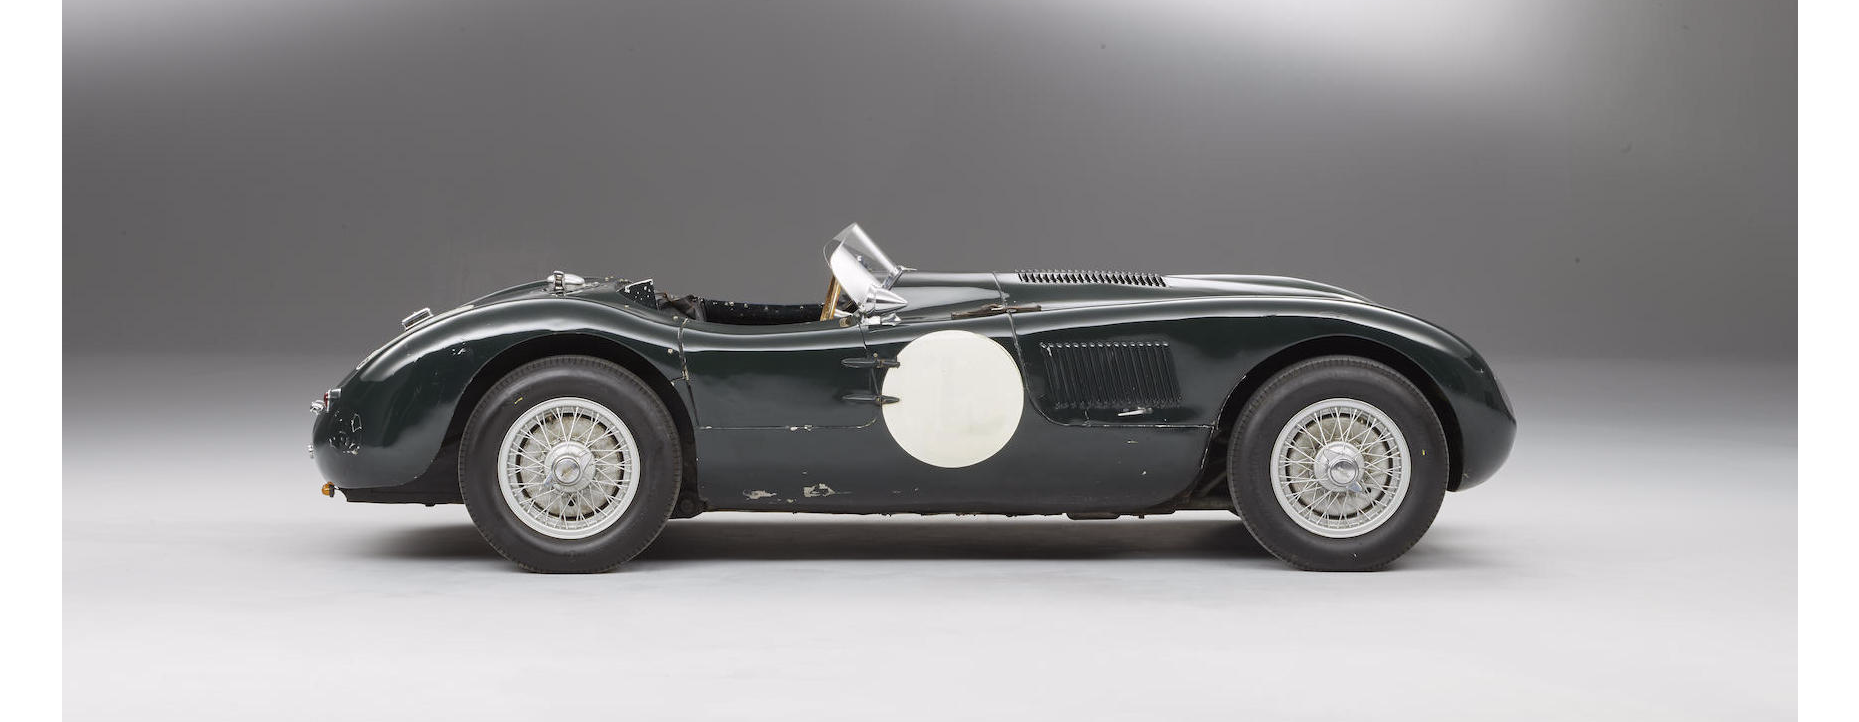 Old Jaguar C-type Purchased for $900 Now Worth $5.8M